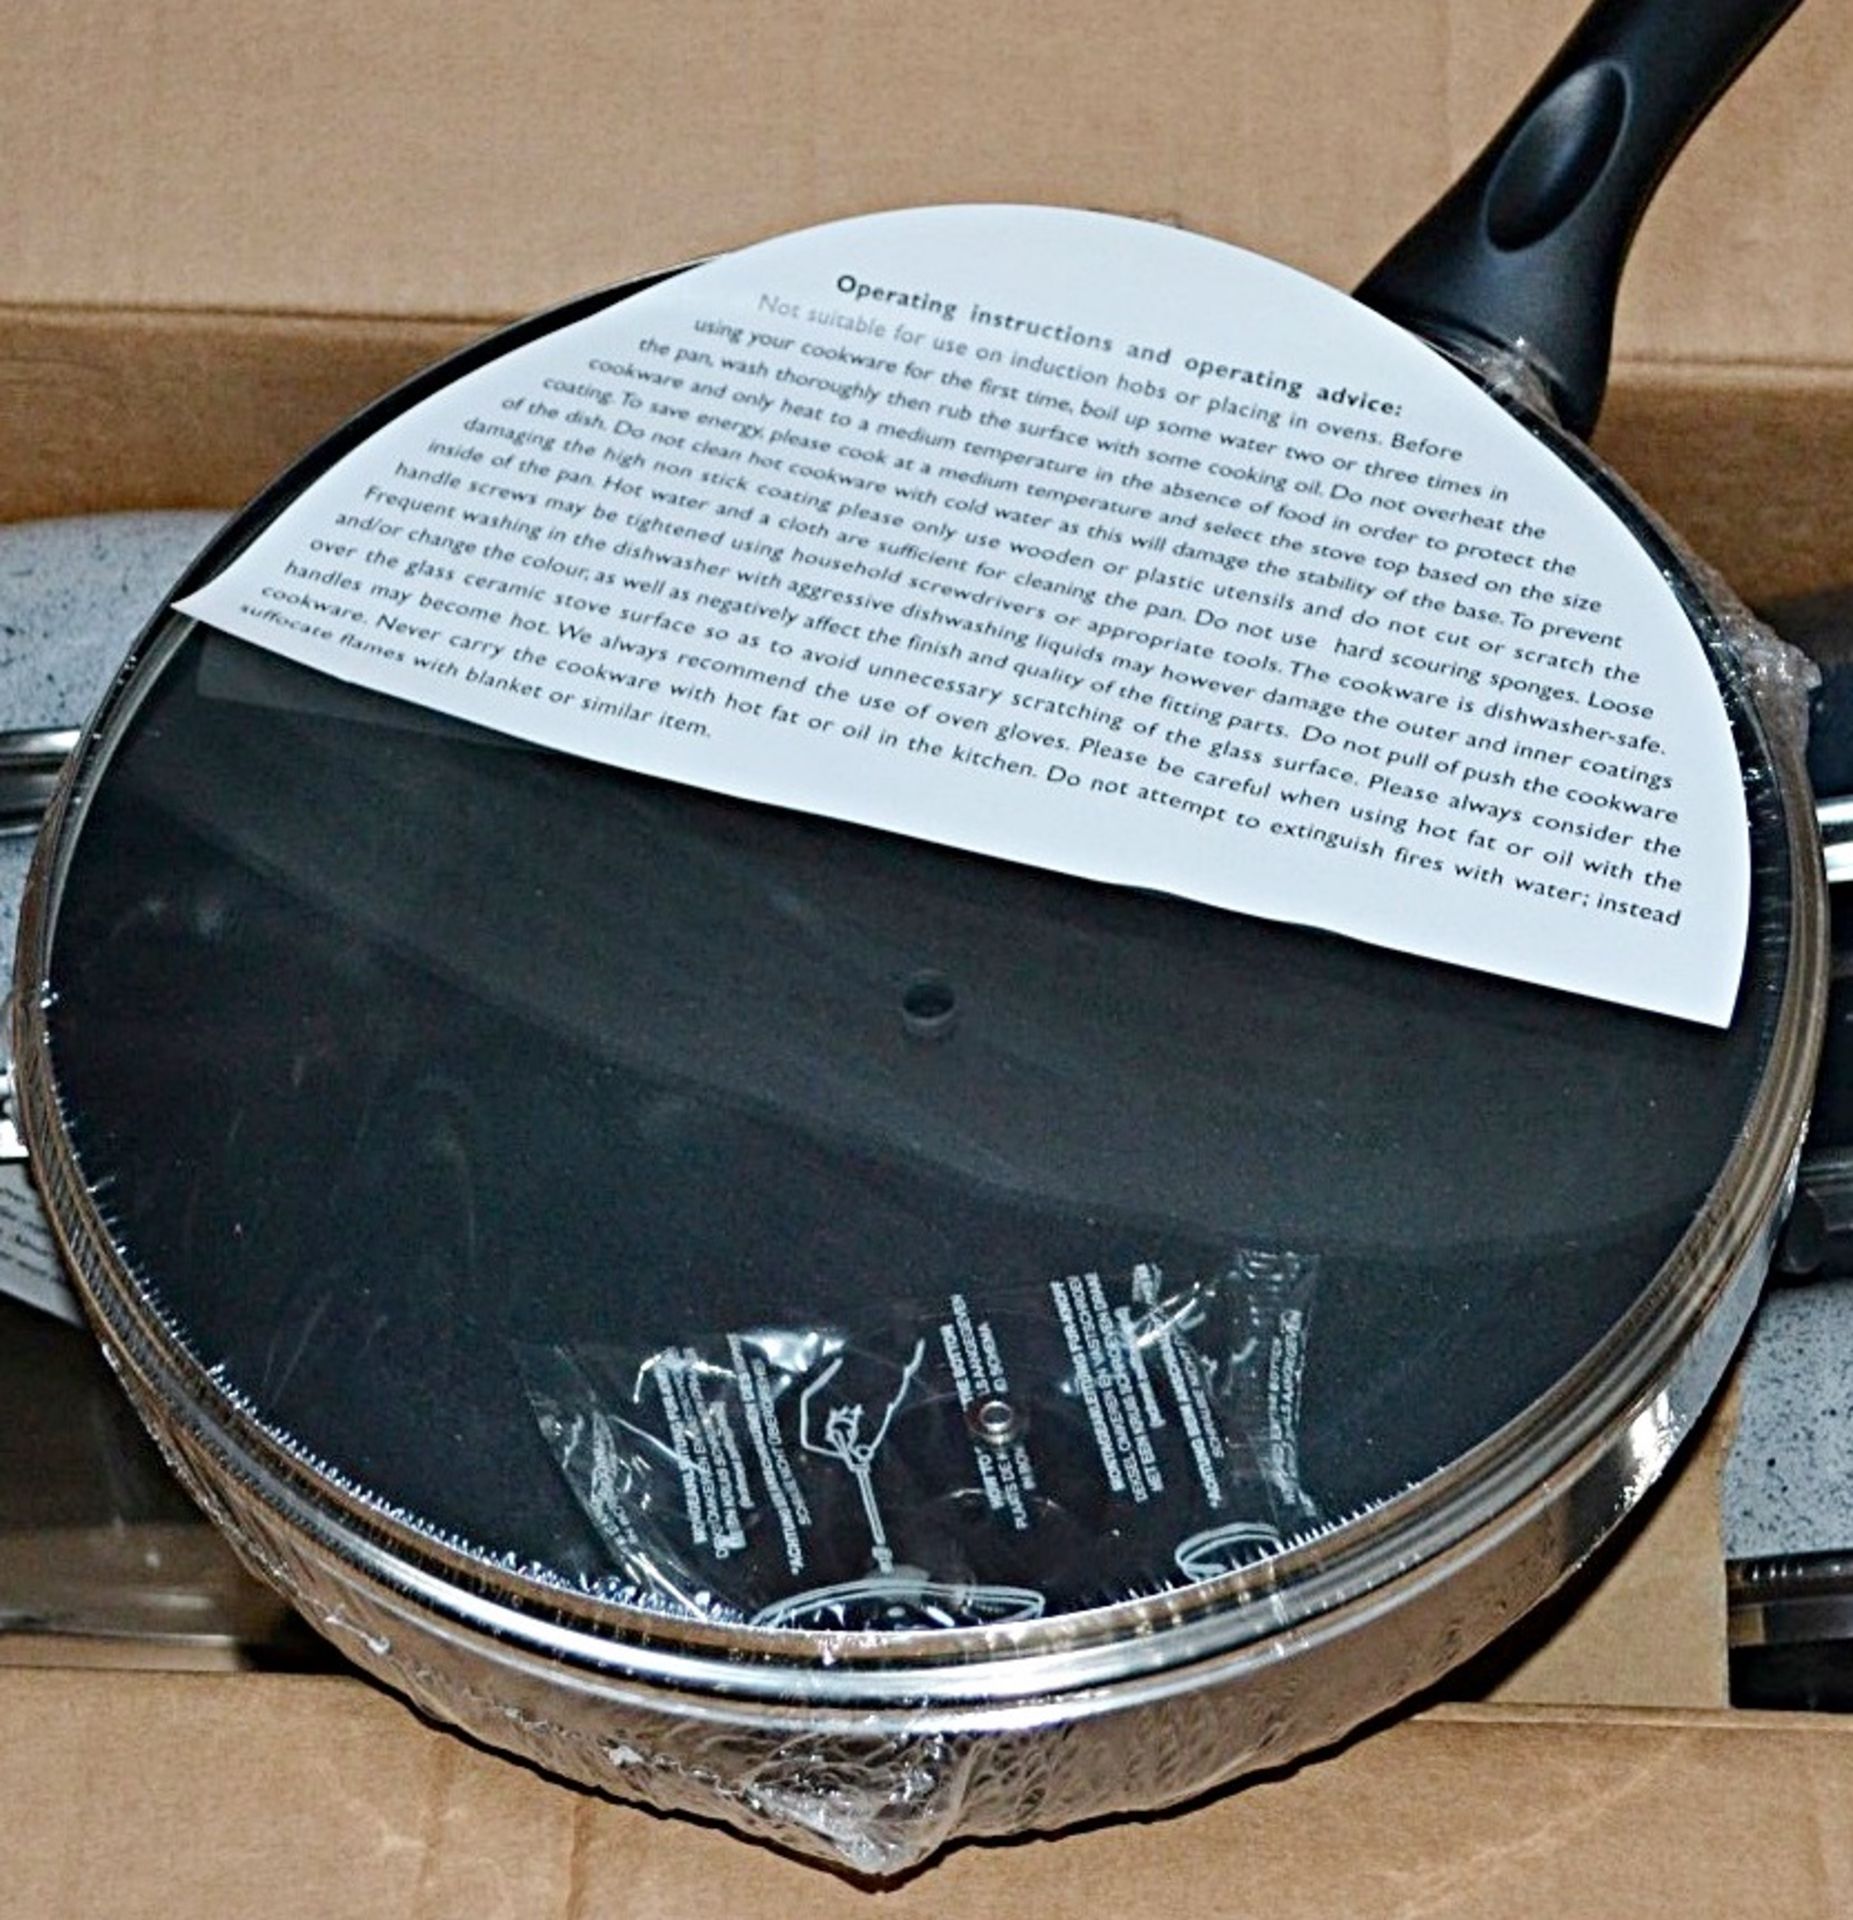 1 x 28cm Non-stick Frying Pans with Glass Lids - Colour: Stone Grey - Made In Italy - New & Sealed - Image 5 of 5